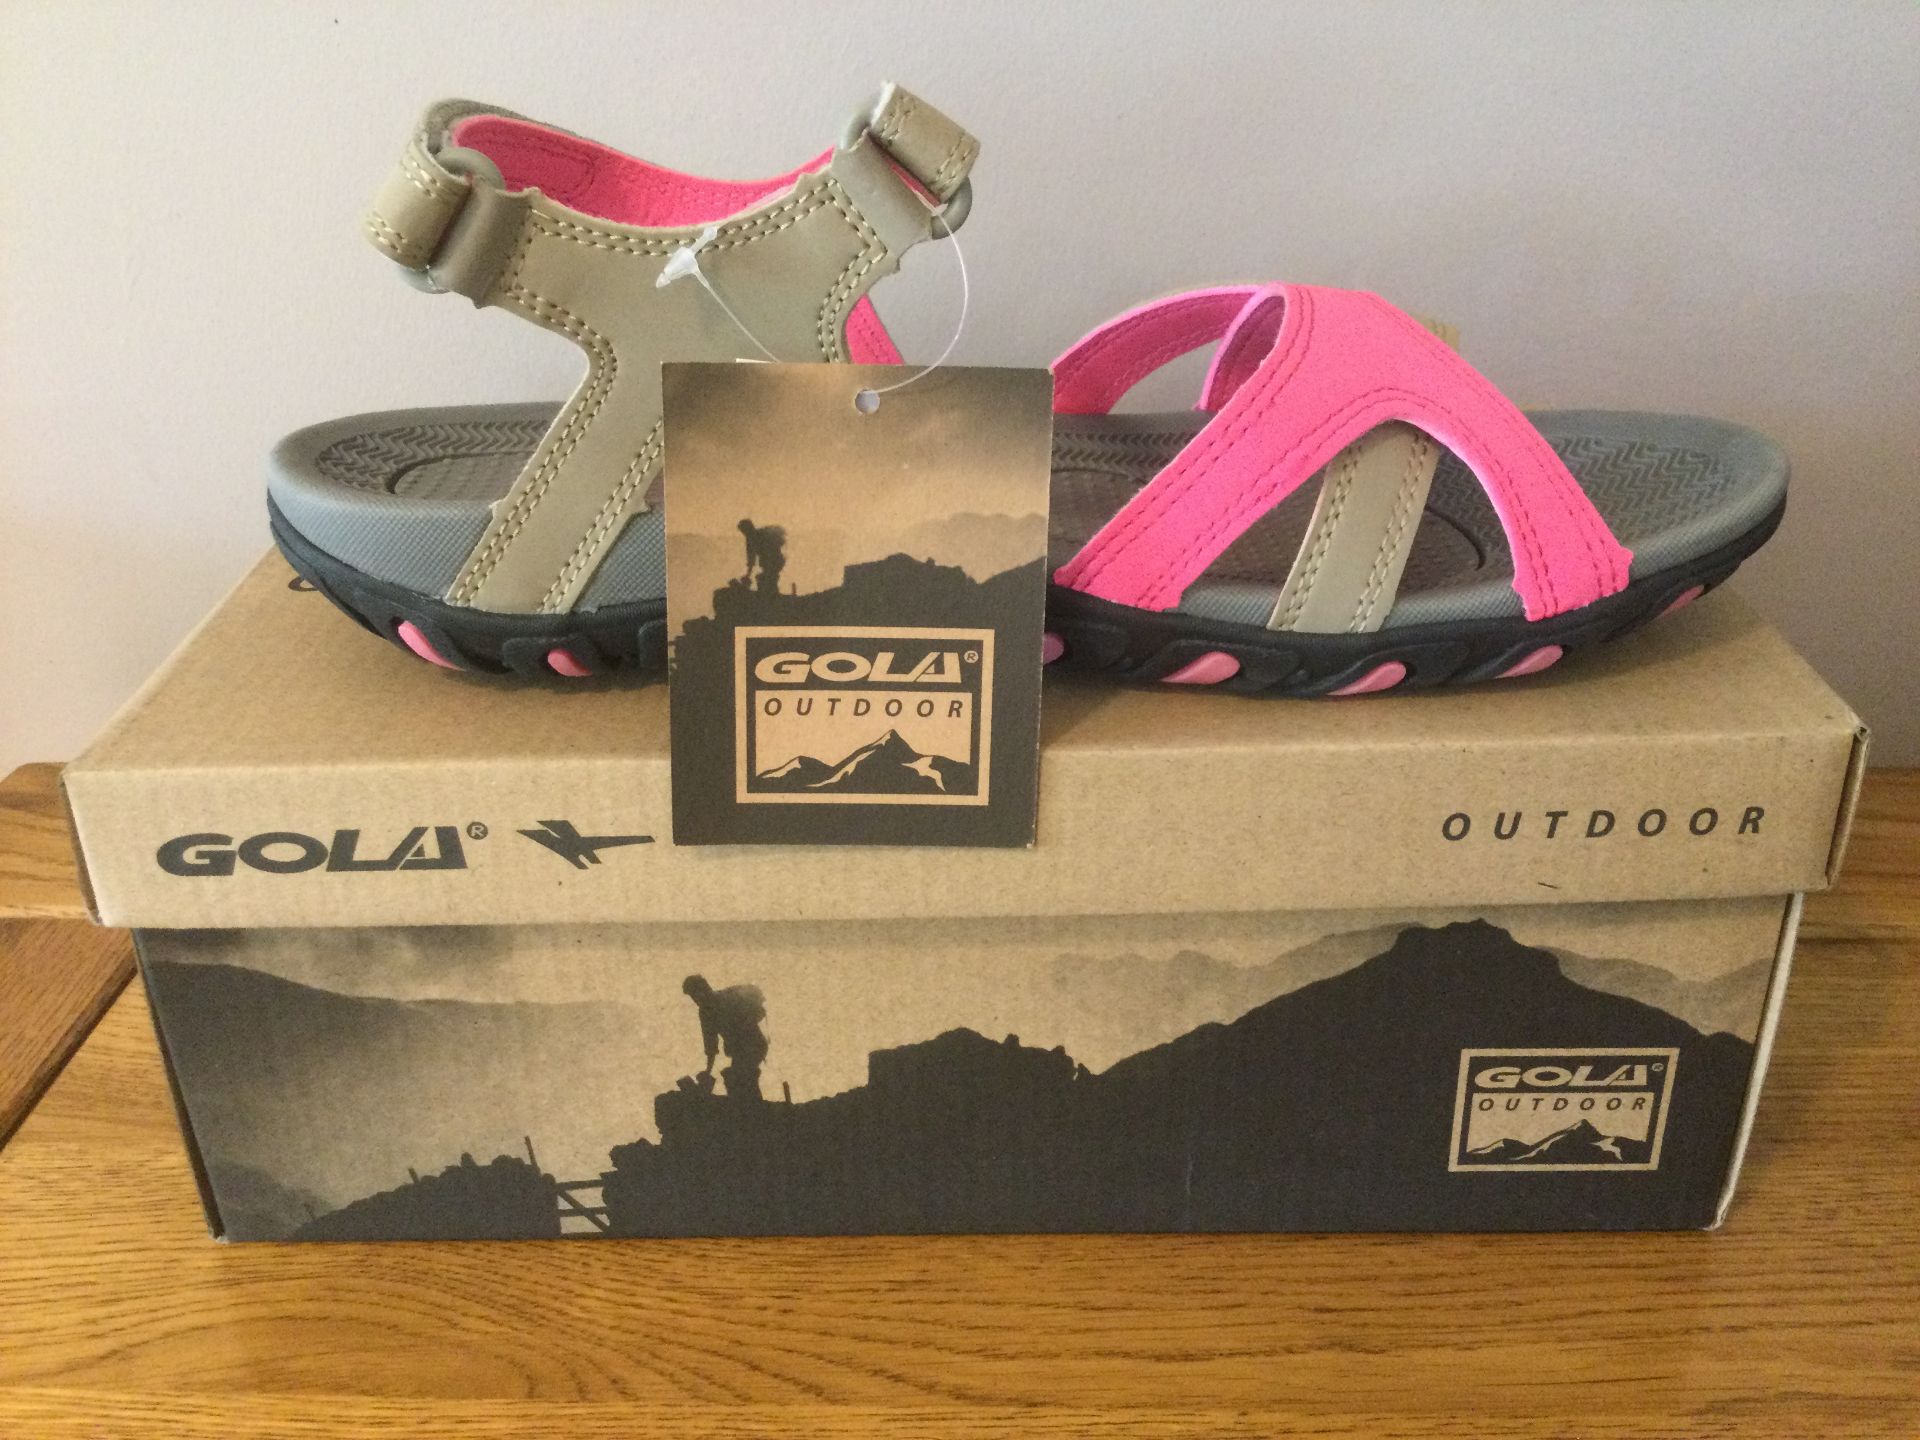 Gola Women's “Cedar” Hiking Sandals, Taupe/Hot Pink, Size 7 - Brand New - Image 2 of 4